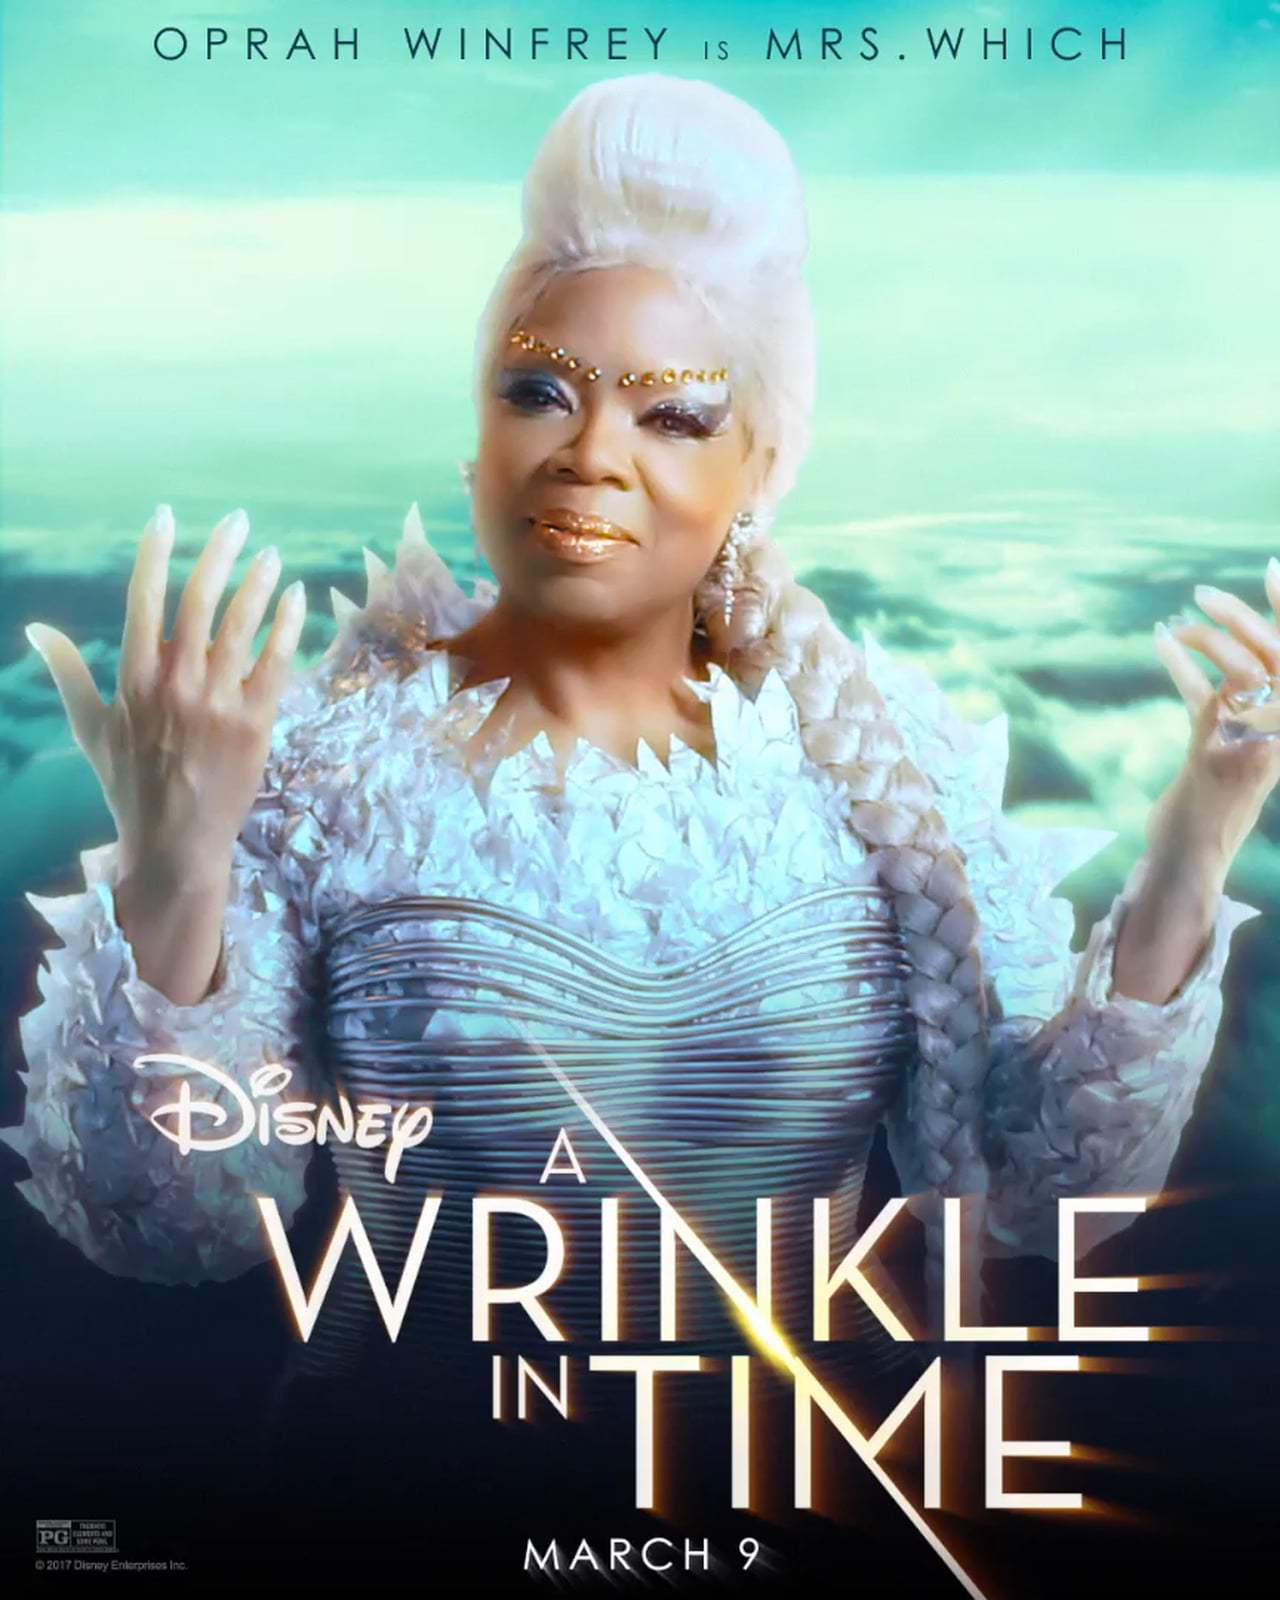 A Wrinkle in Time Motion Poster - Mrs. Which (2018)